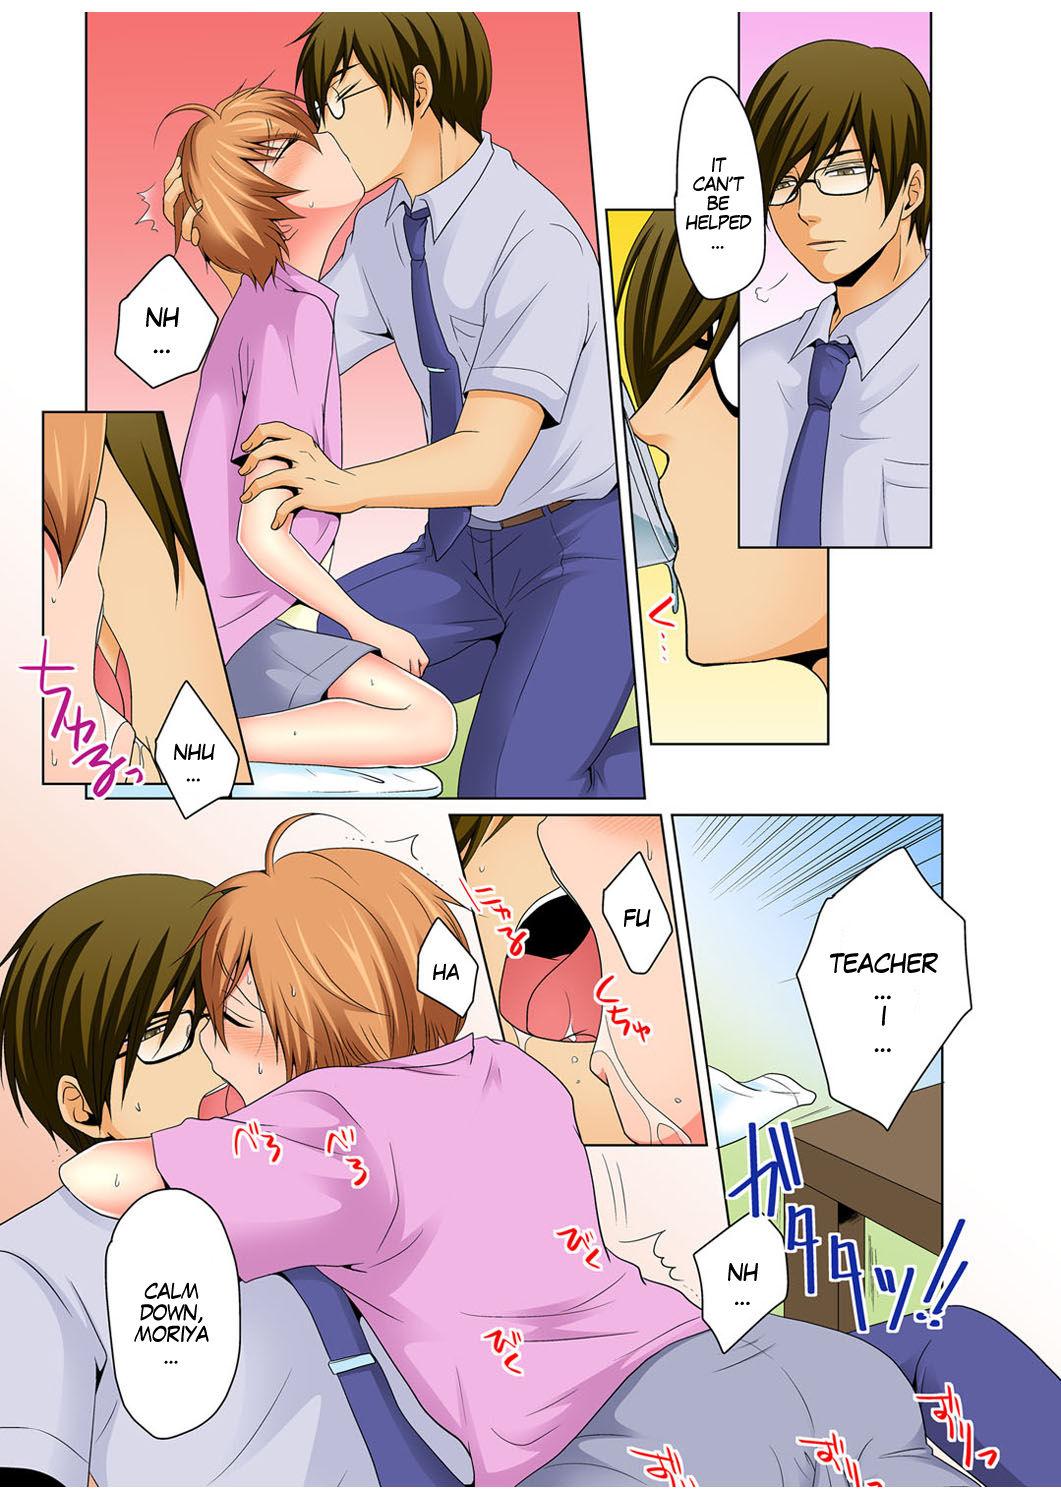 Perverted Nyotaika de Ecchi Kenshin!? Mirudake tte Itta no ni... 3 | Gender Bender Into Sexy Medical Examination! You said that you were only going to look... 3 Cougars - Page 3